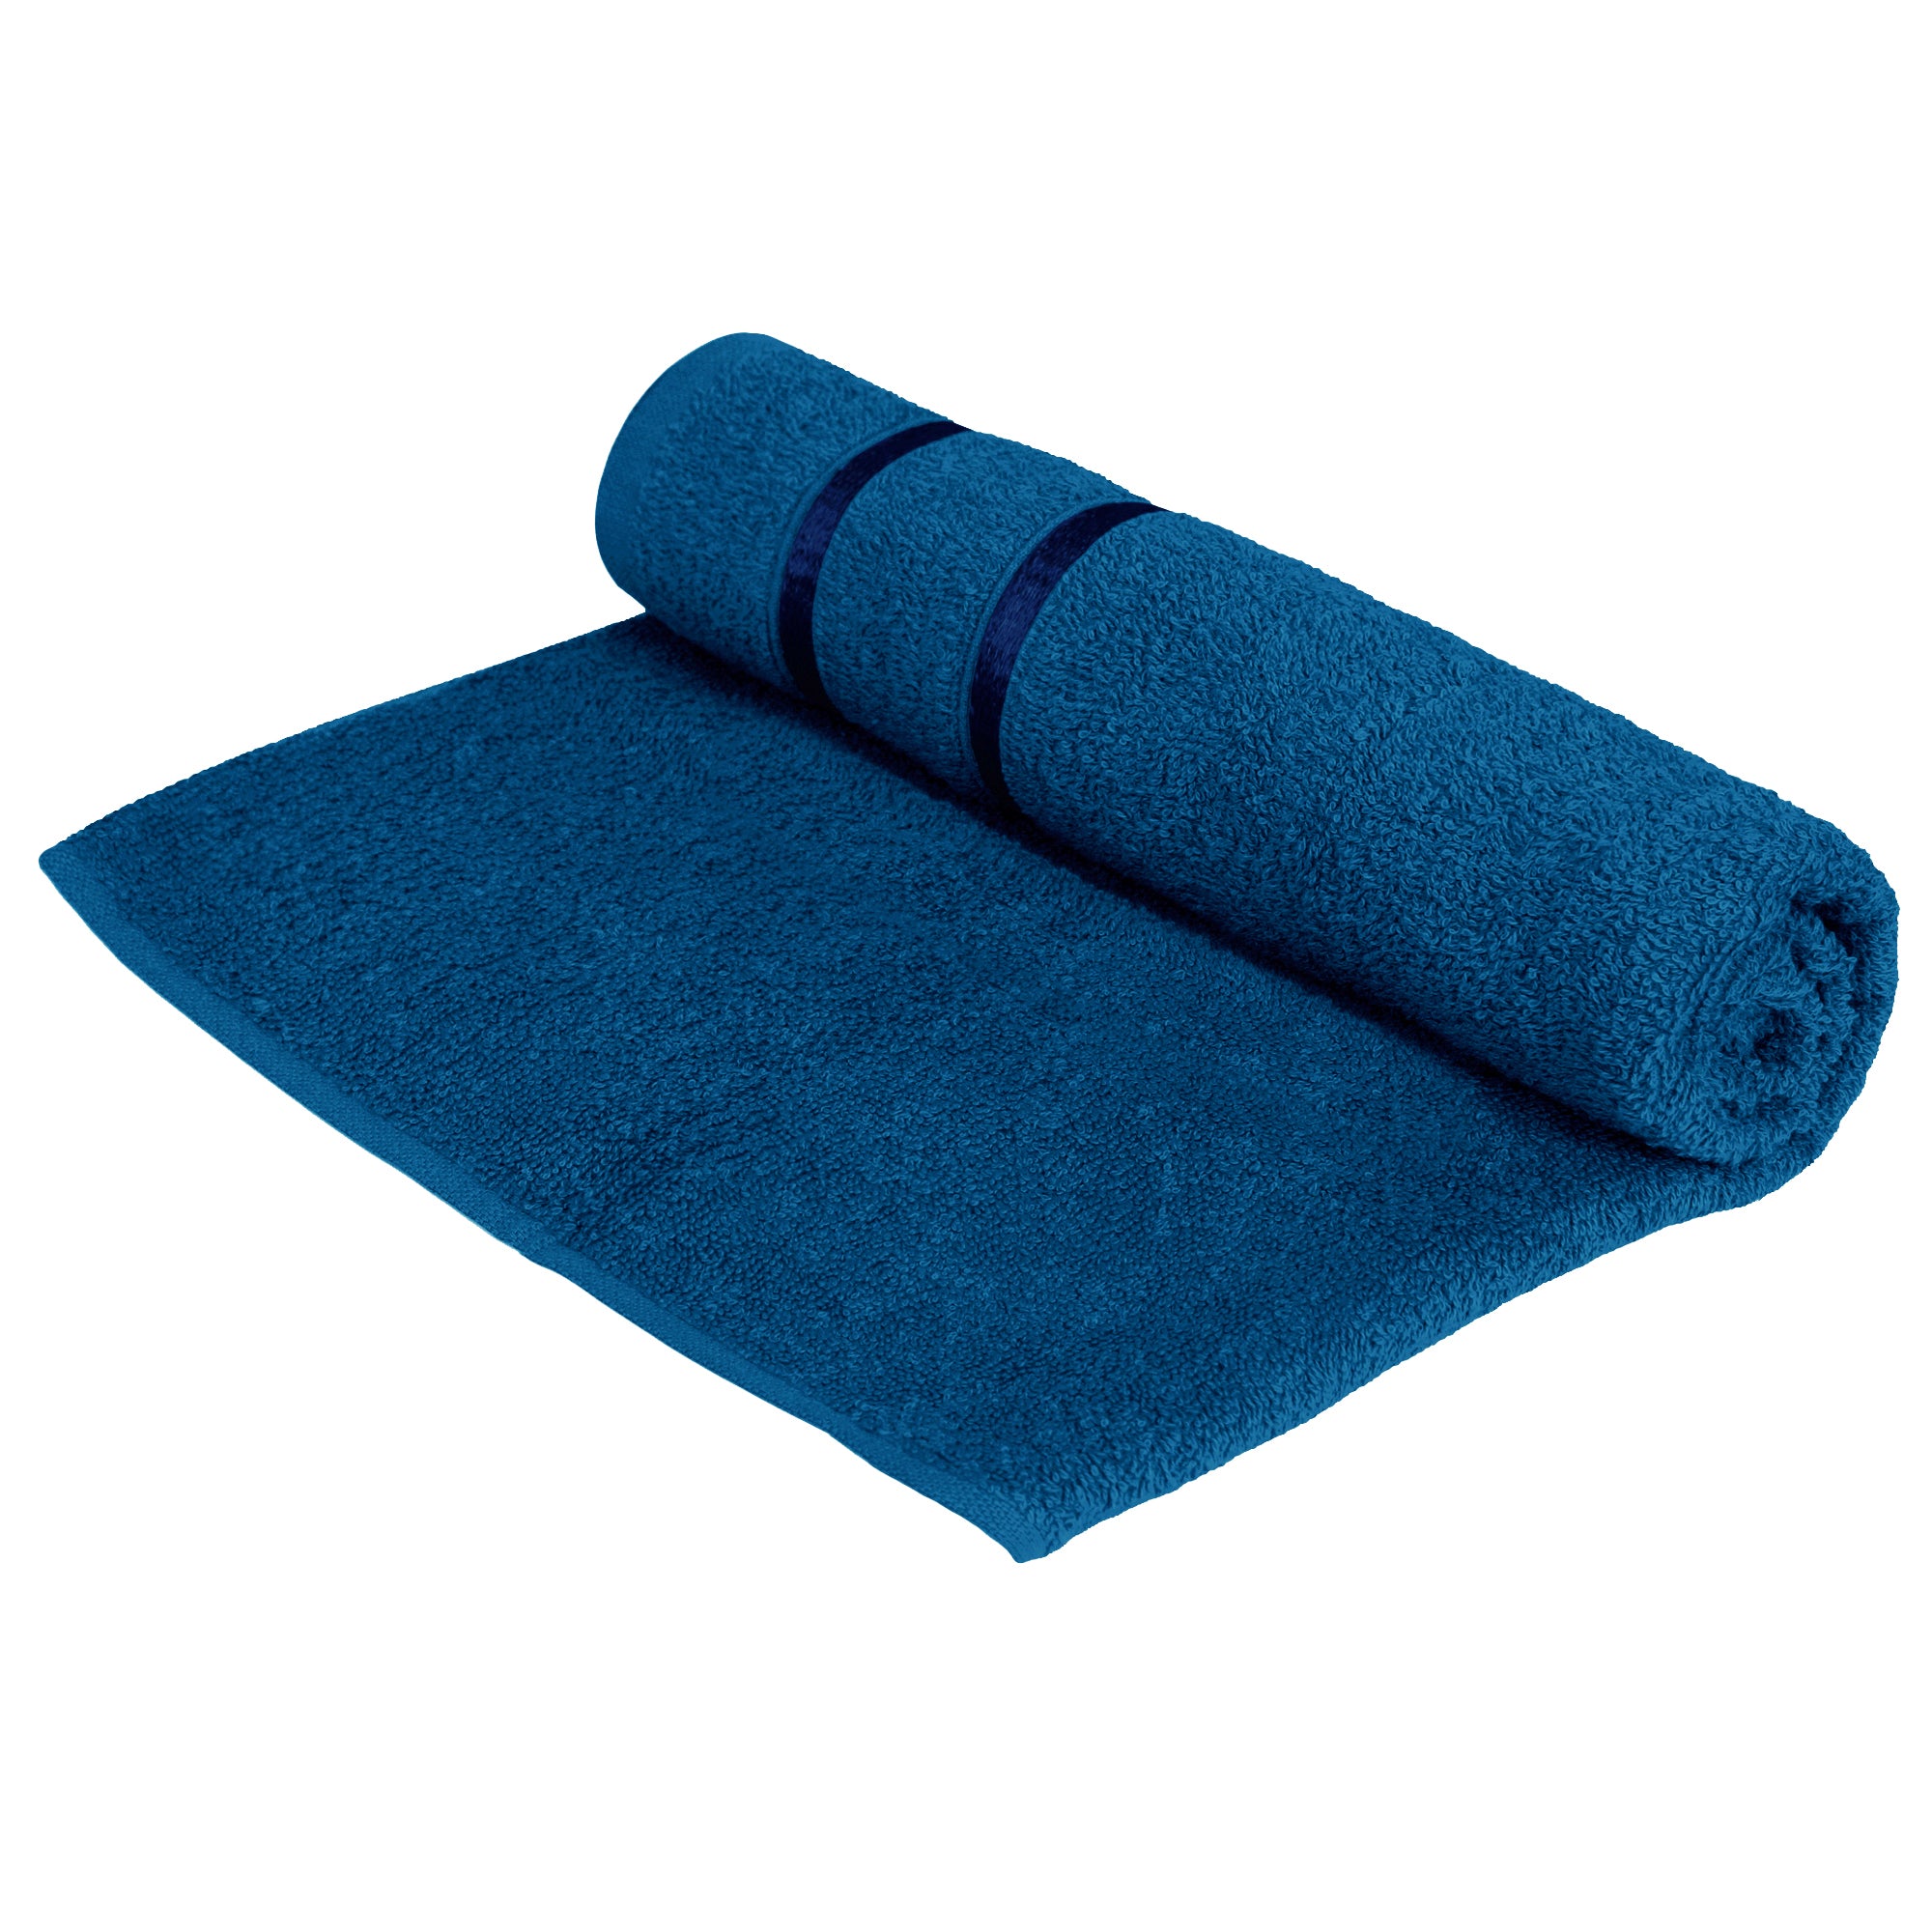 Story@Home 2 Units 100% Cotton Bath Towels - Green and Navy Blue